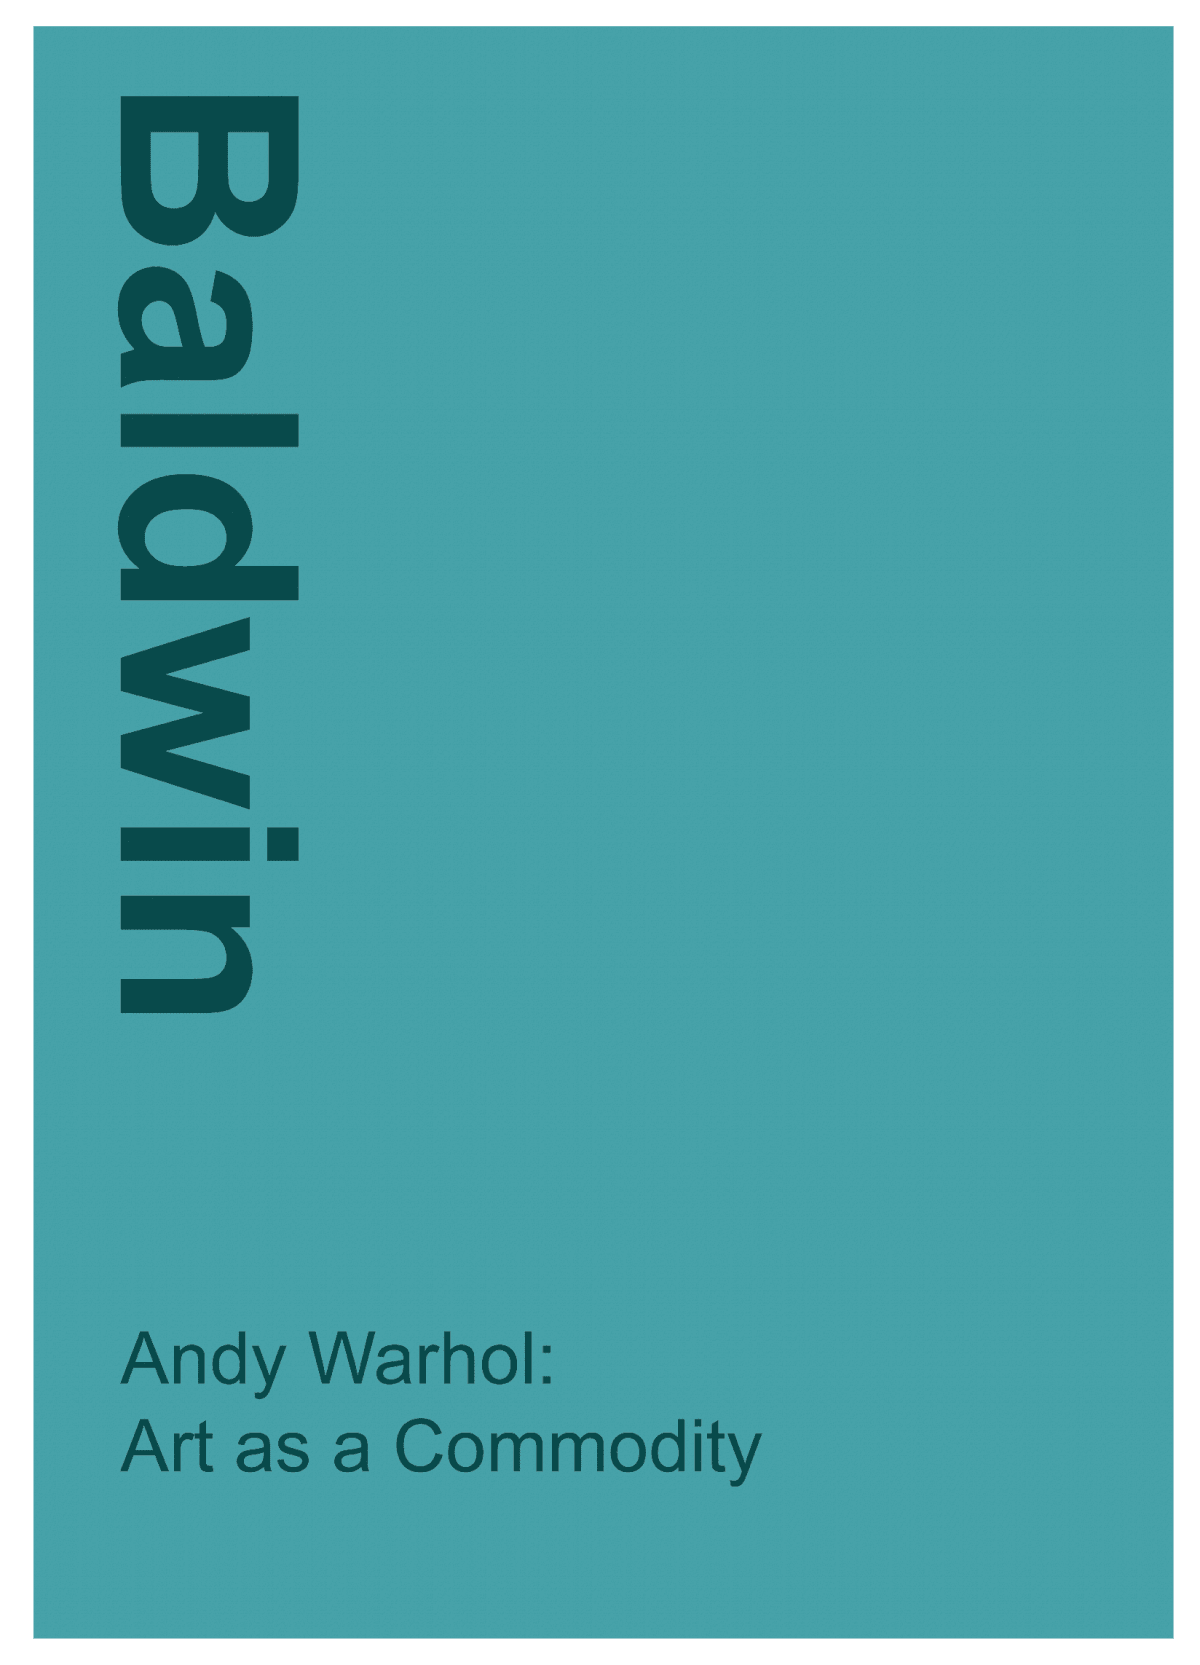 Andy Warhol: Art as a Commodity